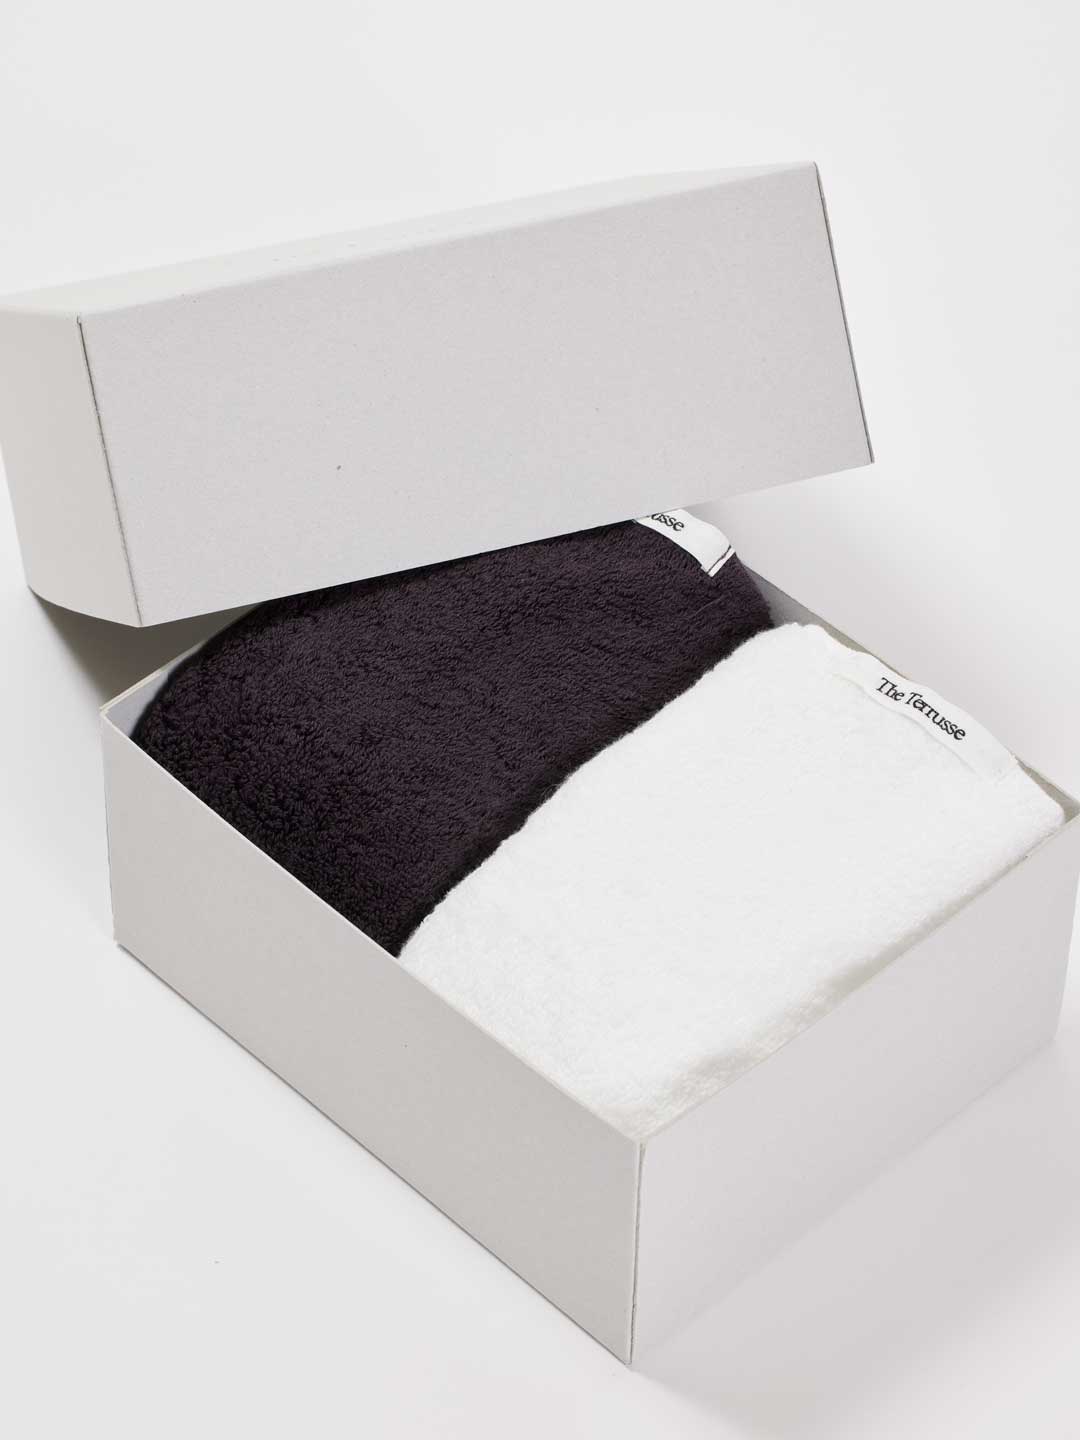 The Terrusse Gift Box Small - Grey